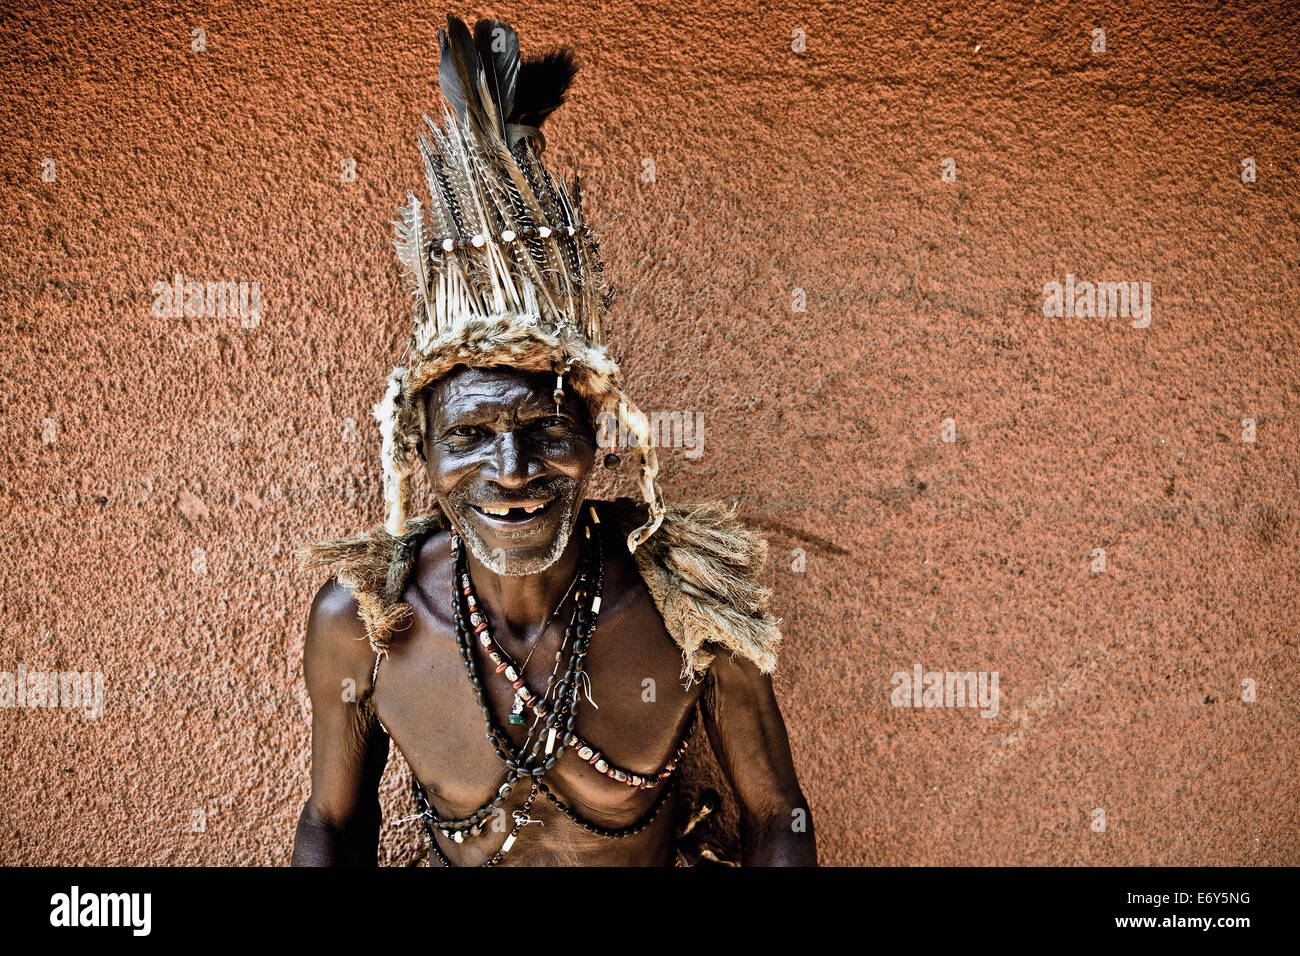 Old man with traditional outfit and headdress, Sambia, Africa Stock Photo